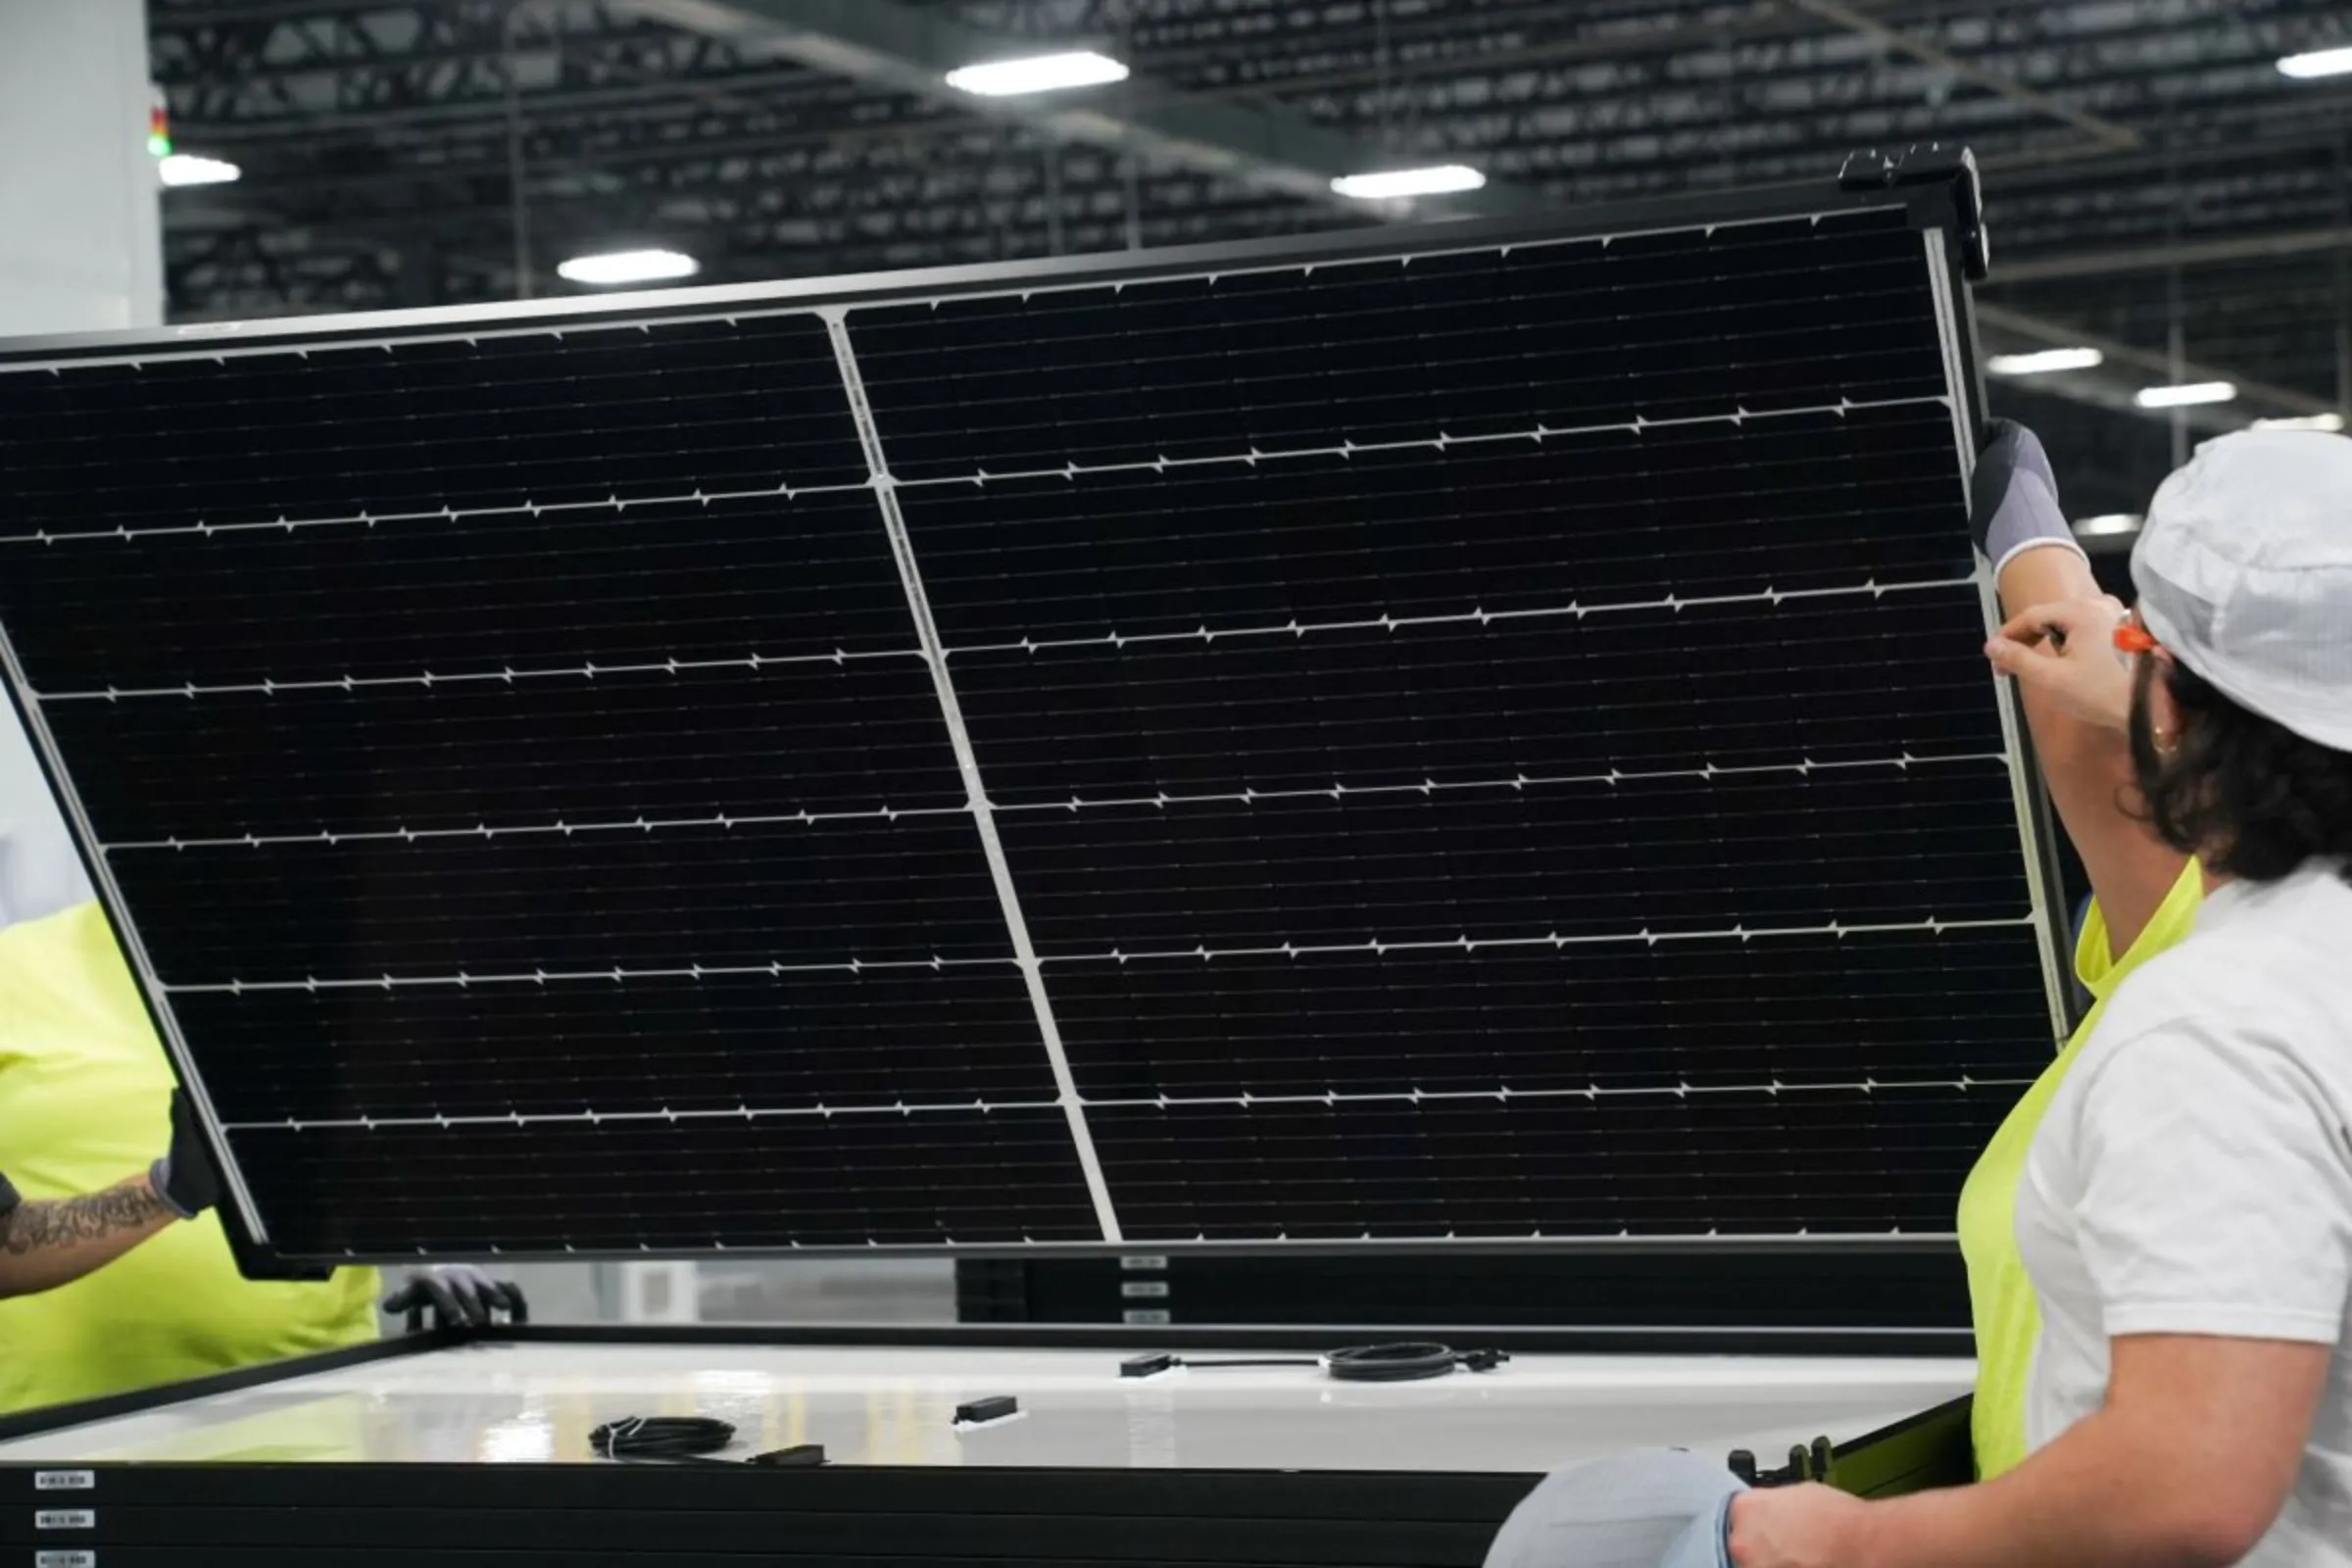 An employee works on solar panels at the QCells solar energy manufacturing factory in Dalton, Georgia, U.S., March 2, 2023. REUTERS/Megan Varner